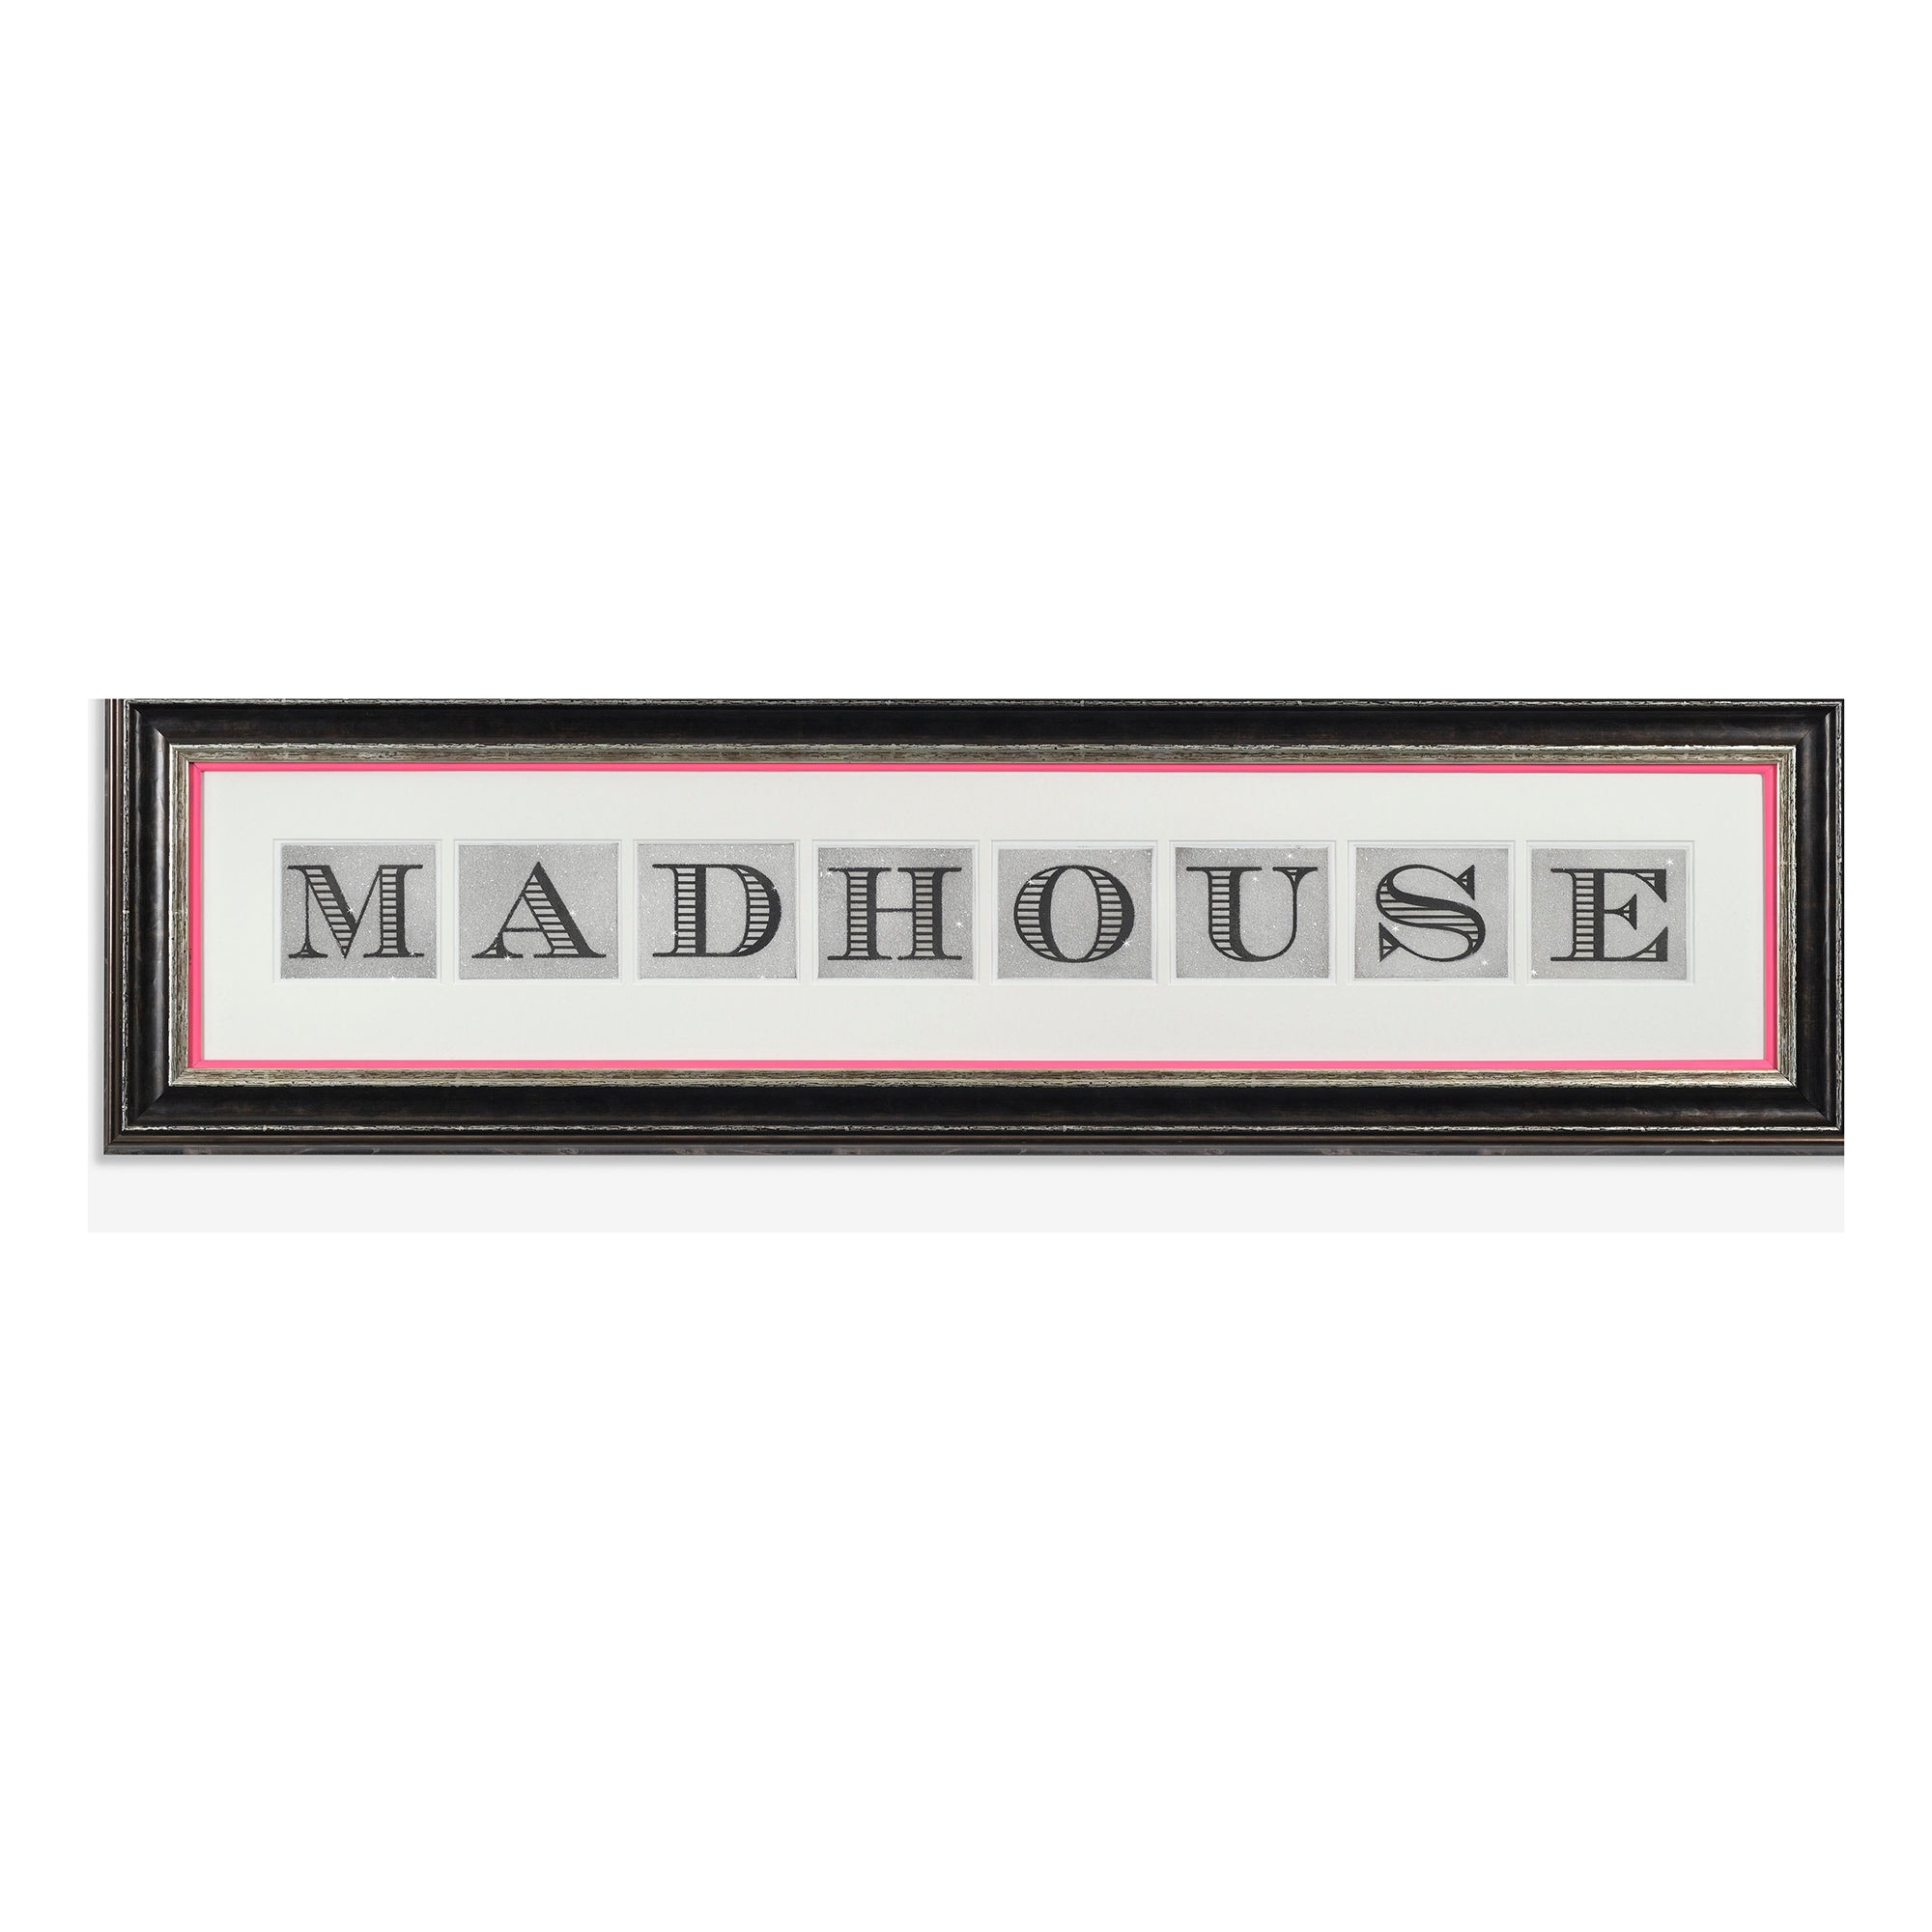 MADHOUSE by Guy Allen